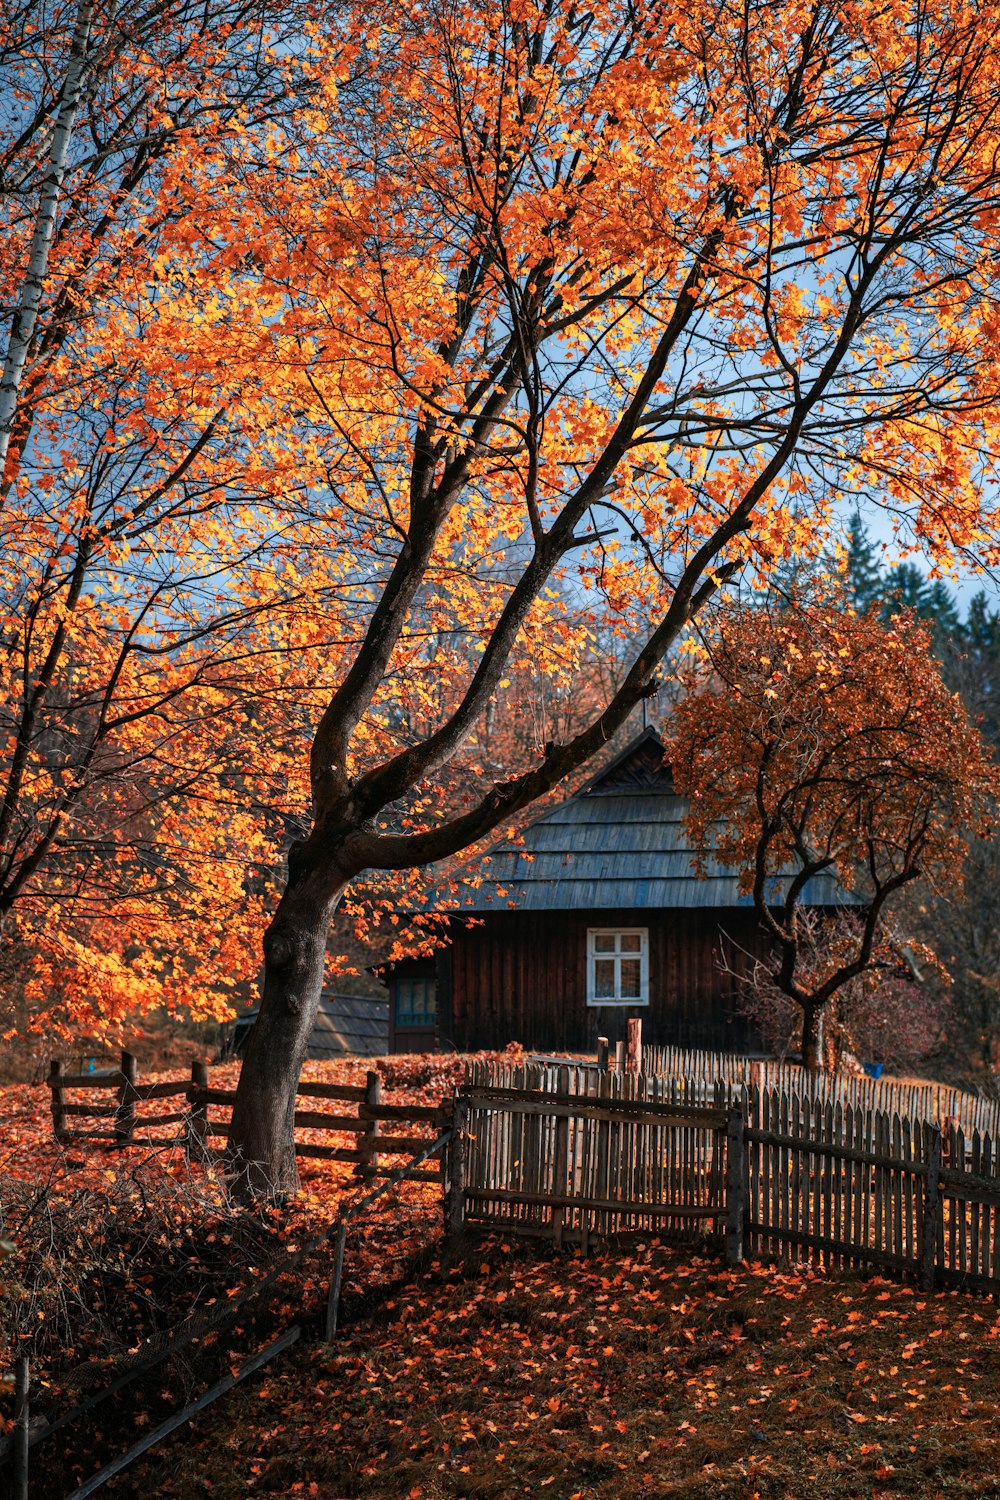 a tree with orange leaves in front of a wooden fence